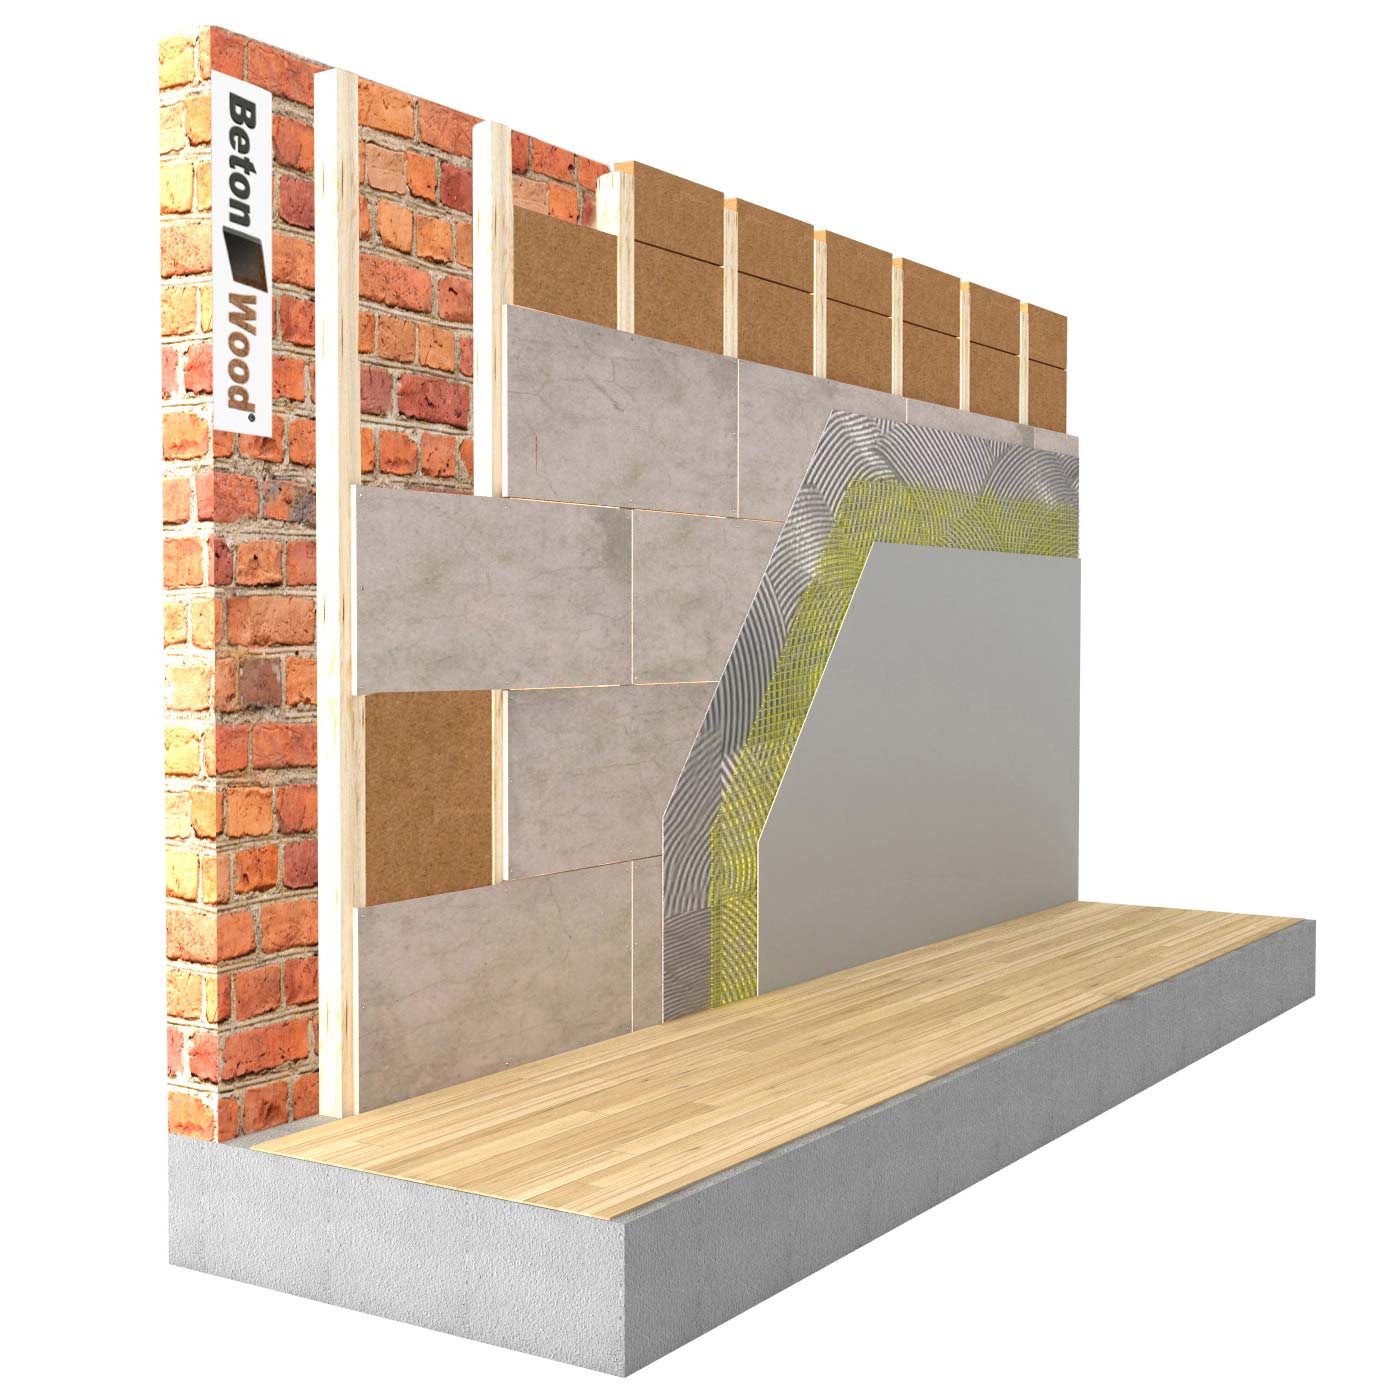 Internal insulation system with fiber wood FiberTherm Internal and cement bonded particle board on masonry